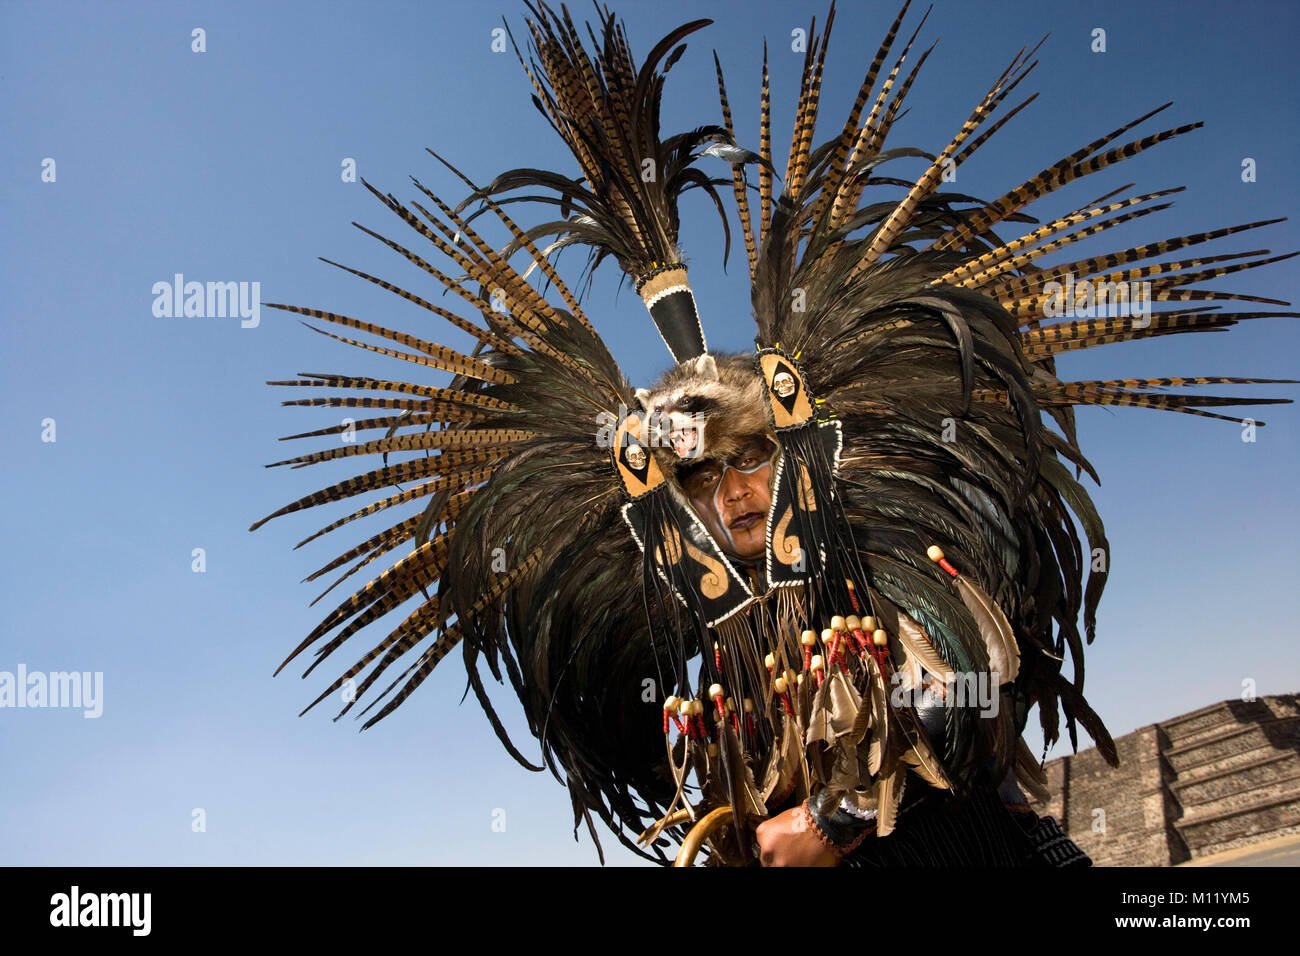 Mexico. Teotihuacan. Oldest Pre-hispanic Indian ruins. Vernal equinox. Beginning of spring. 21 March. Indian dressed for ceremony. Stock Photo